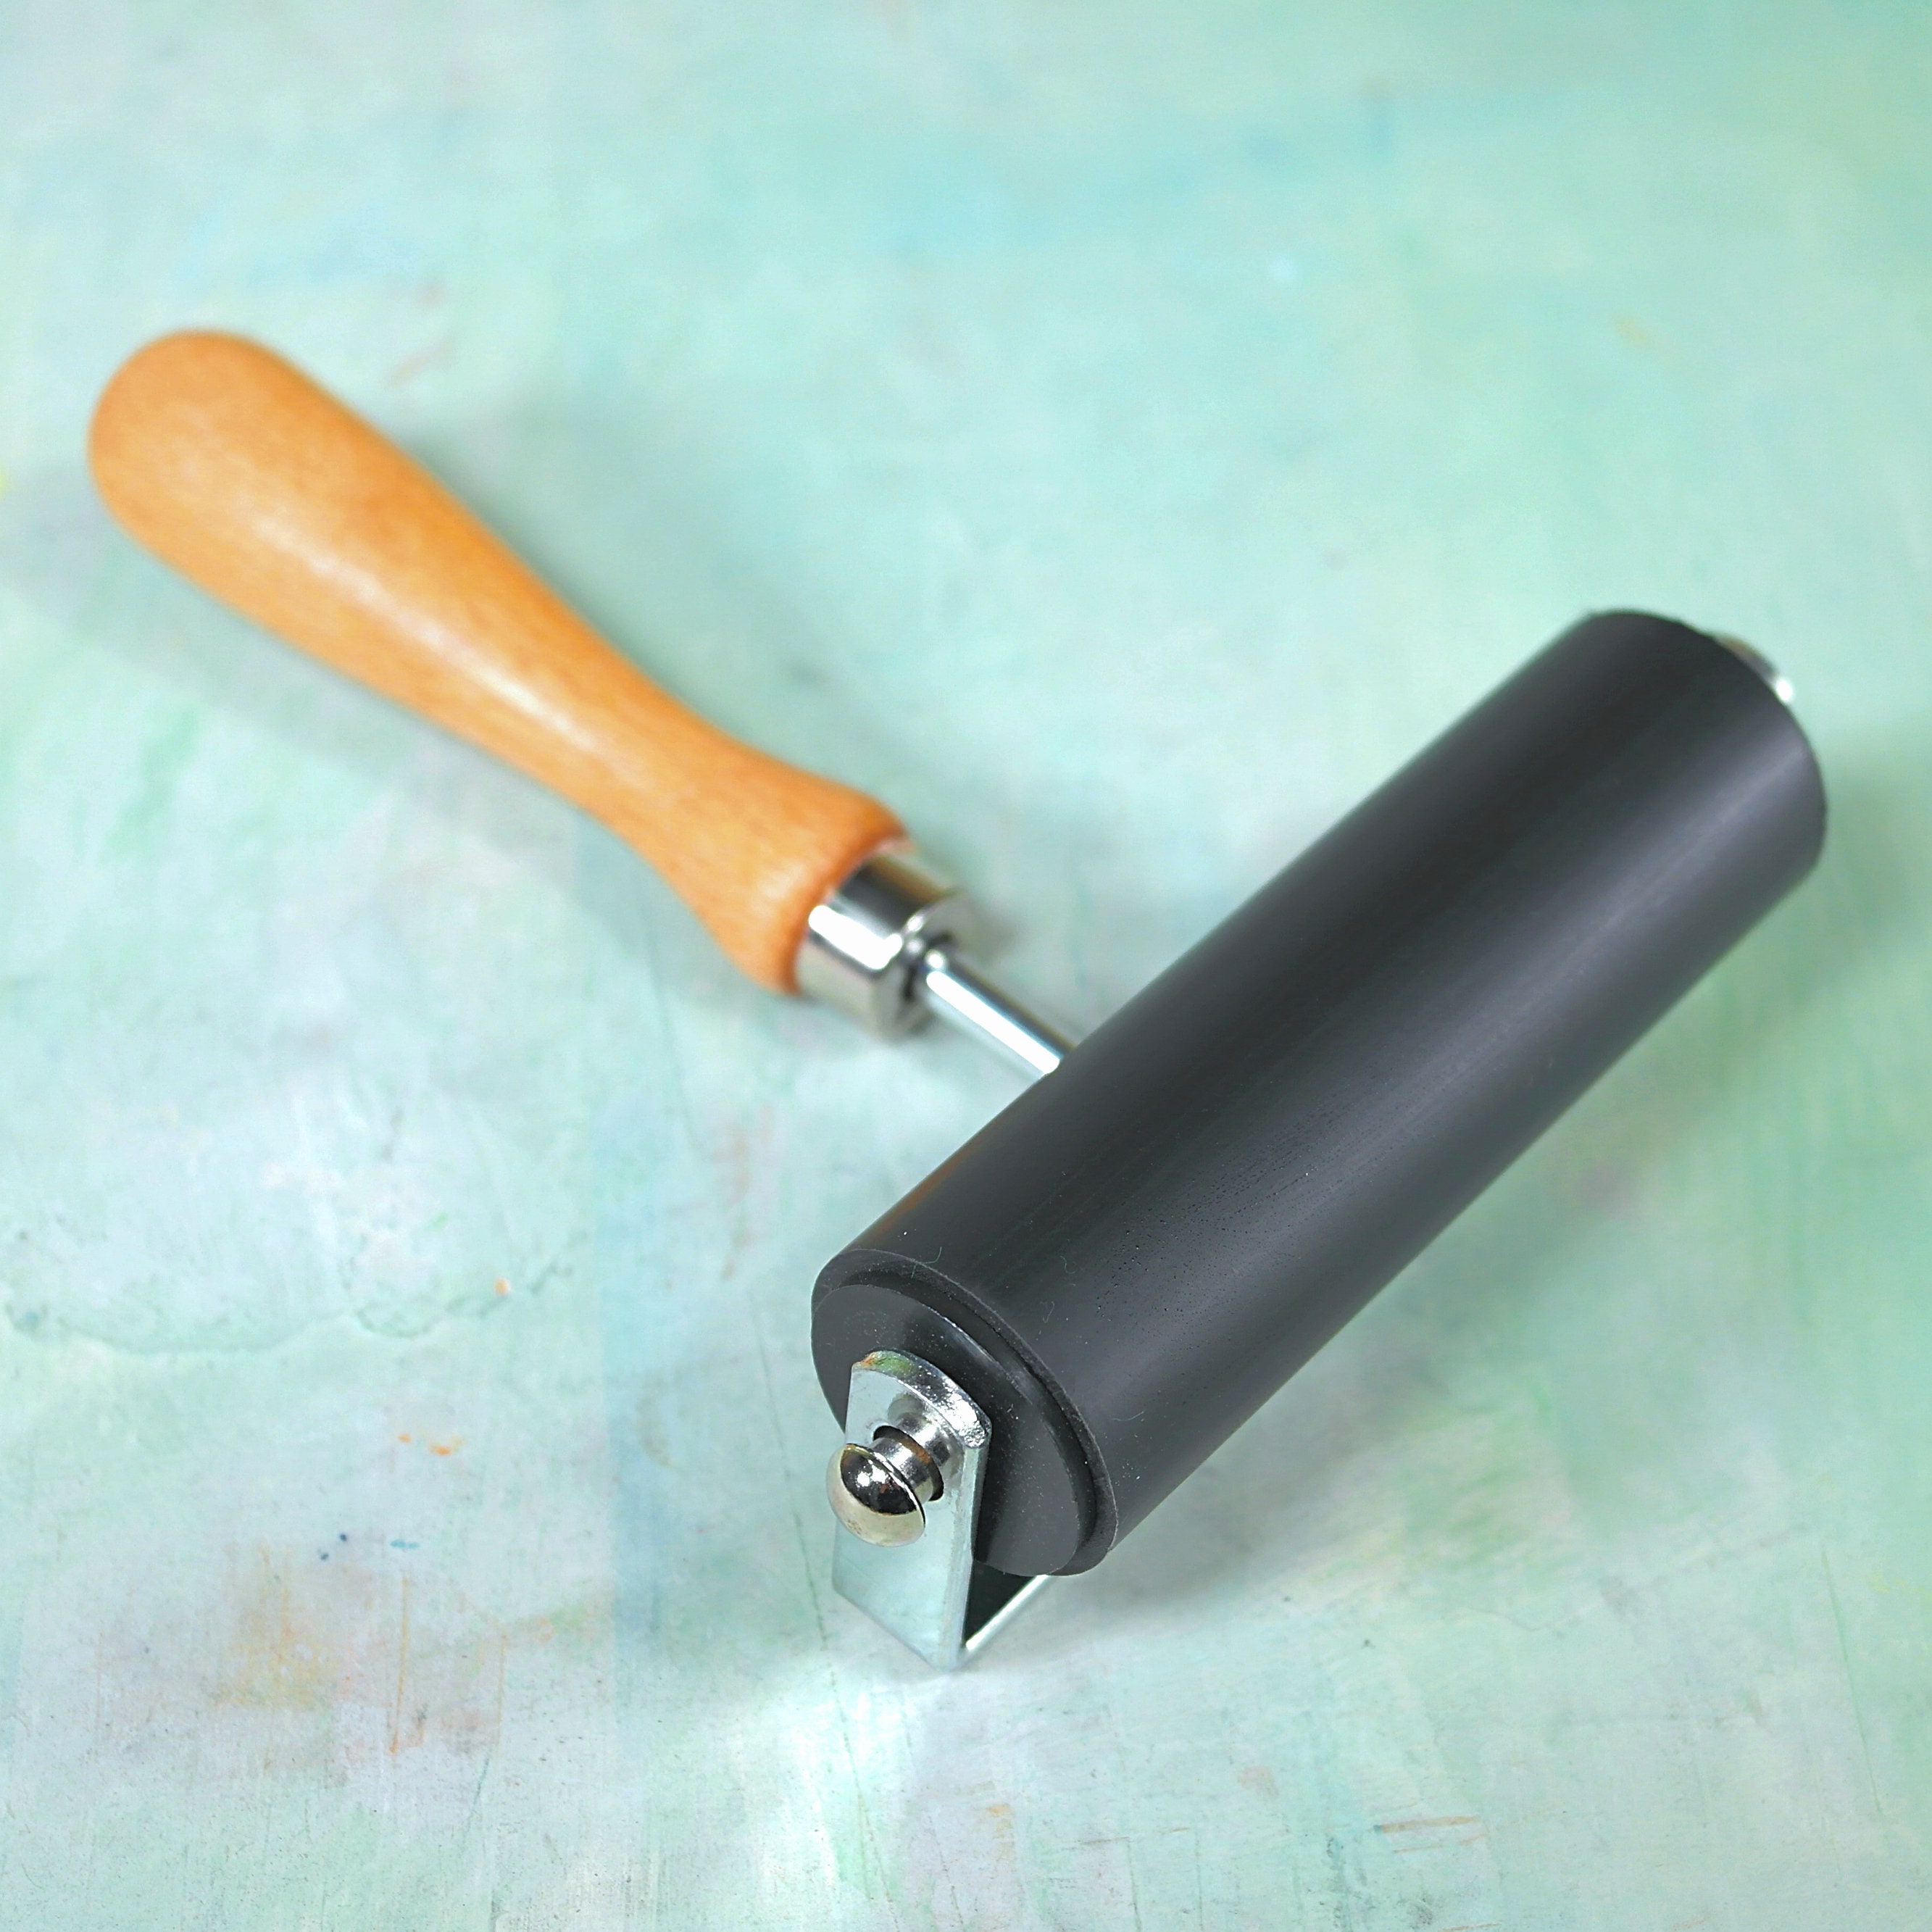 Japanese Soft Rubber Roller / Brayer - Rollers & Brayers - Relief and Lino  Printing - Printmaking - Color